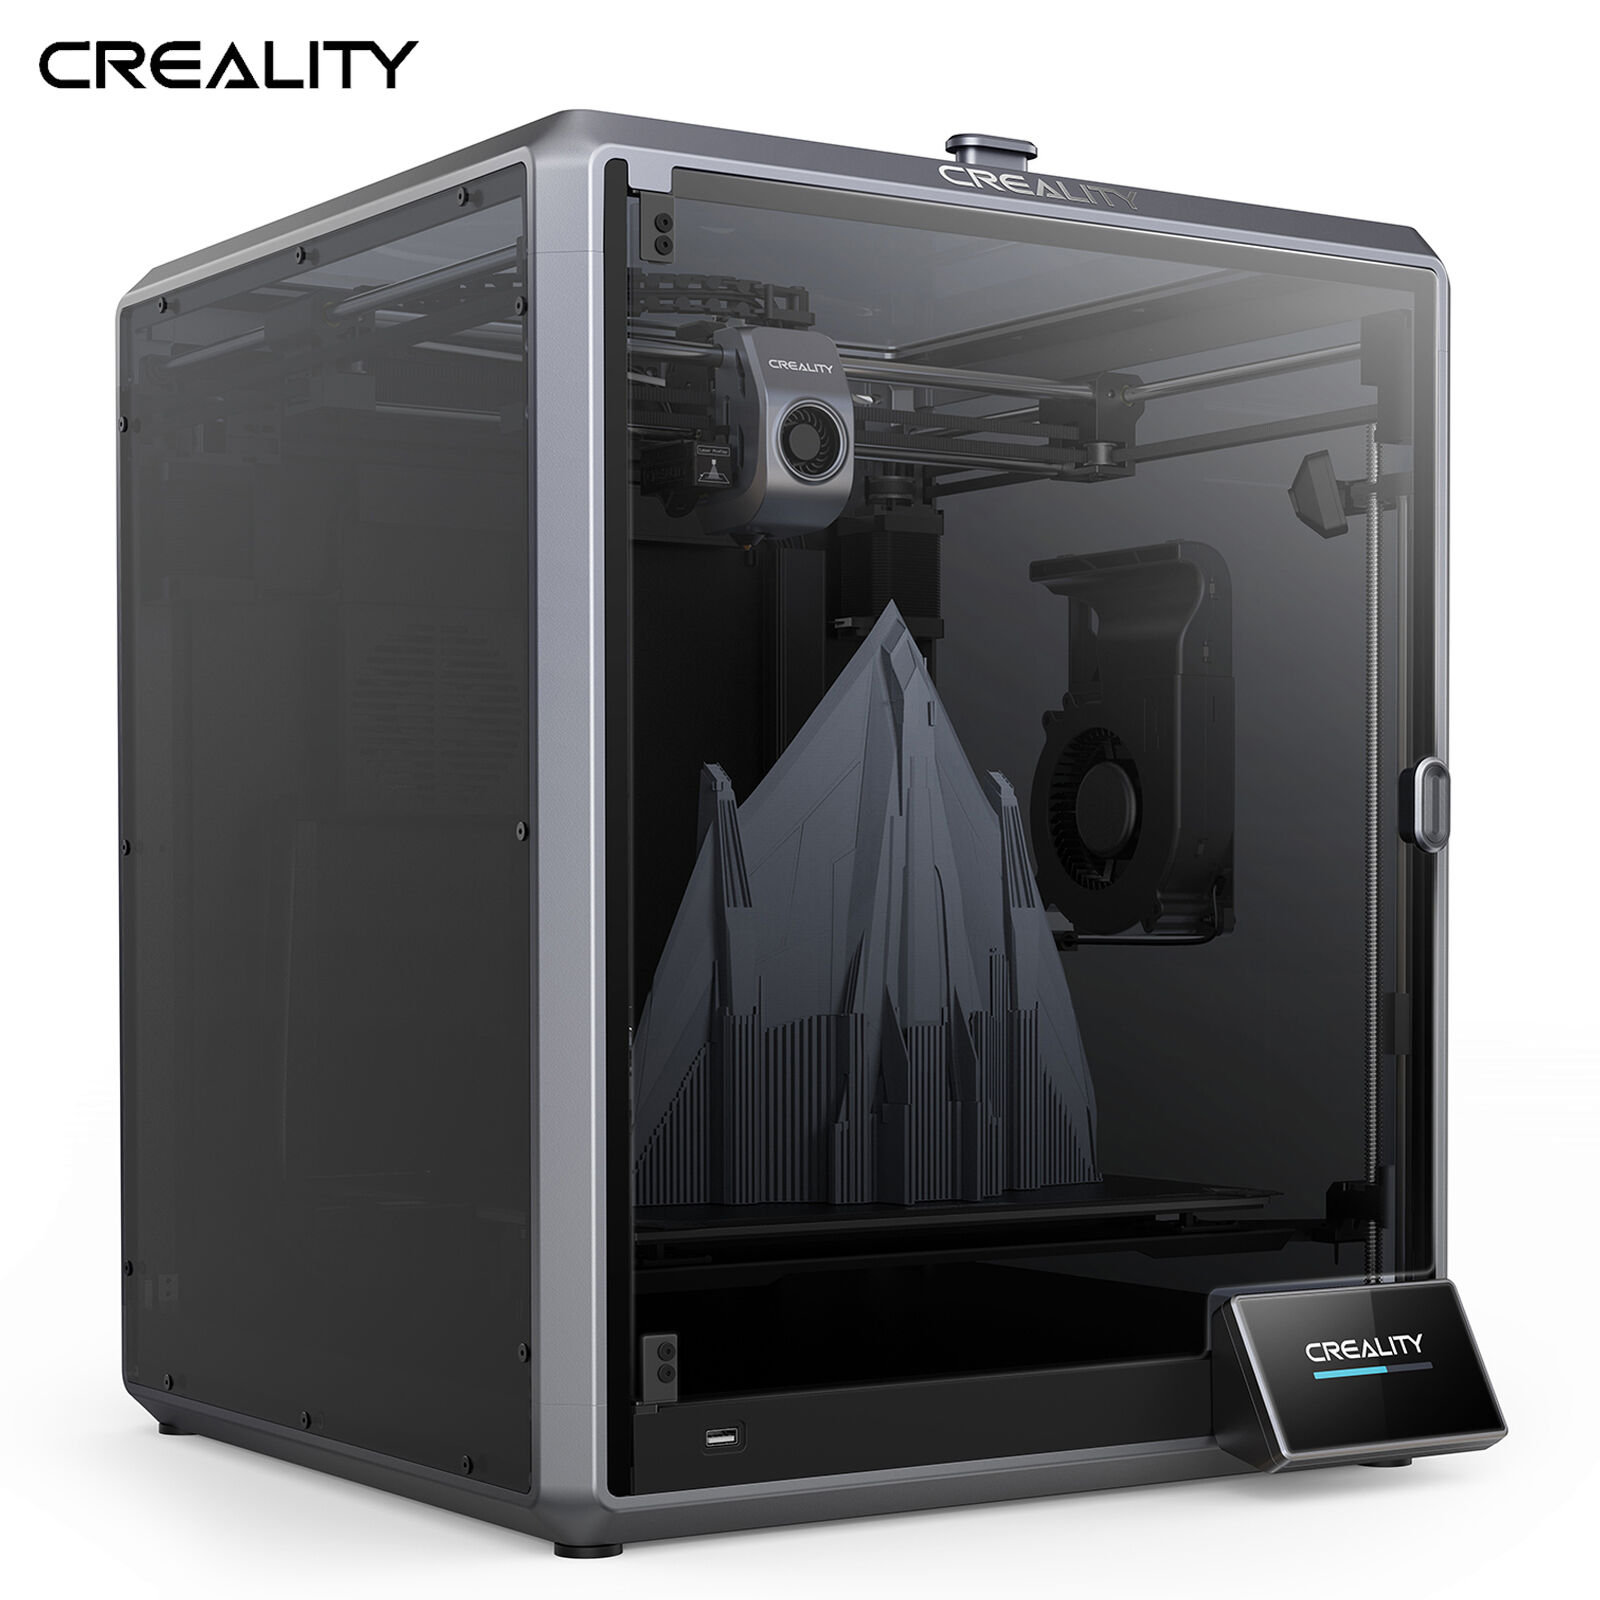 Creality K1 Max 3D Printer w/ Dual Hands-free Auto Leveling Direct Extruder C3Z1